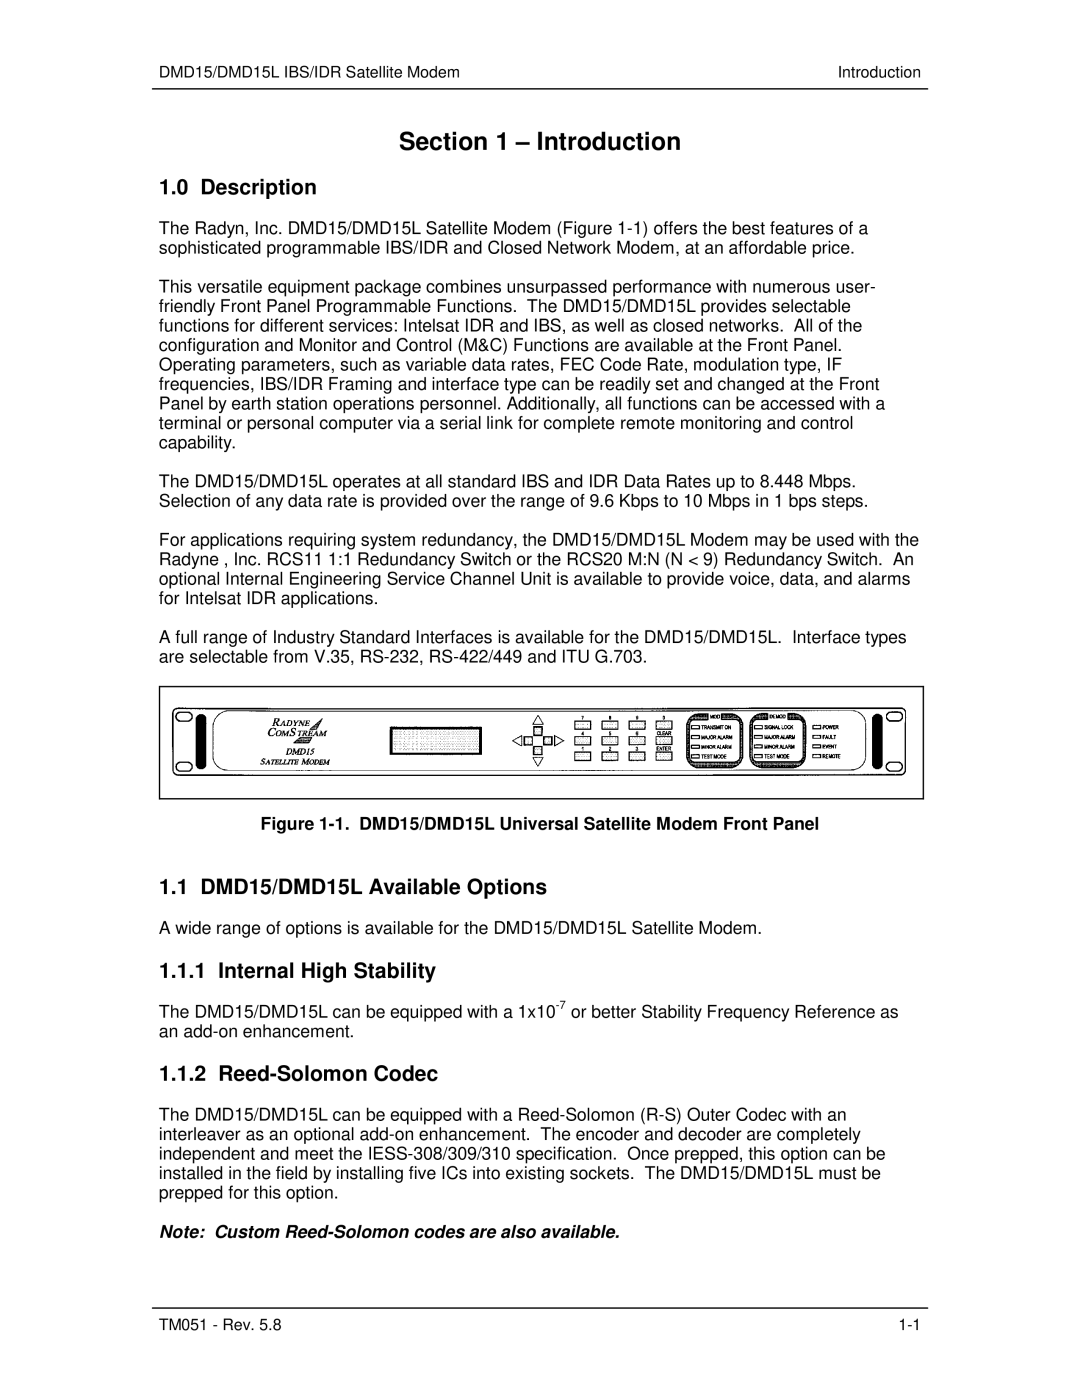 Paradyne operation manual Description, DMD15/DMD15L Available Options, Internal High Stability, Reed-Solomon Codec 